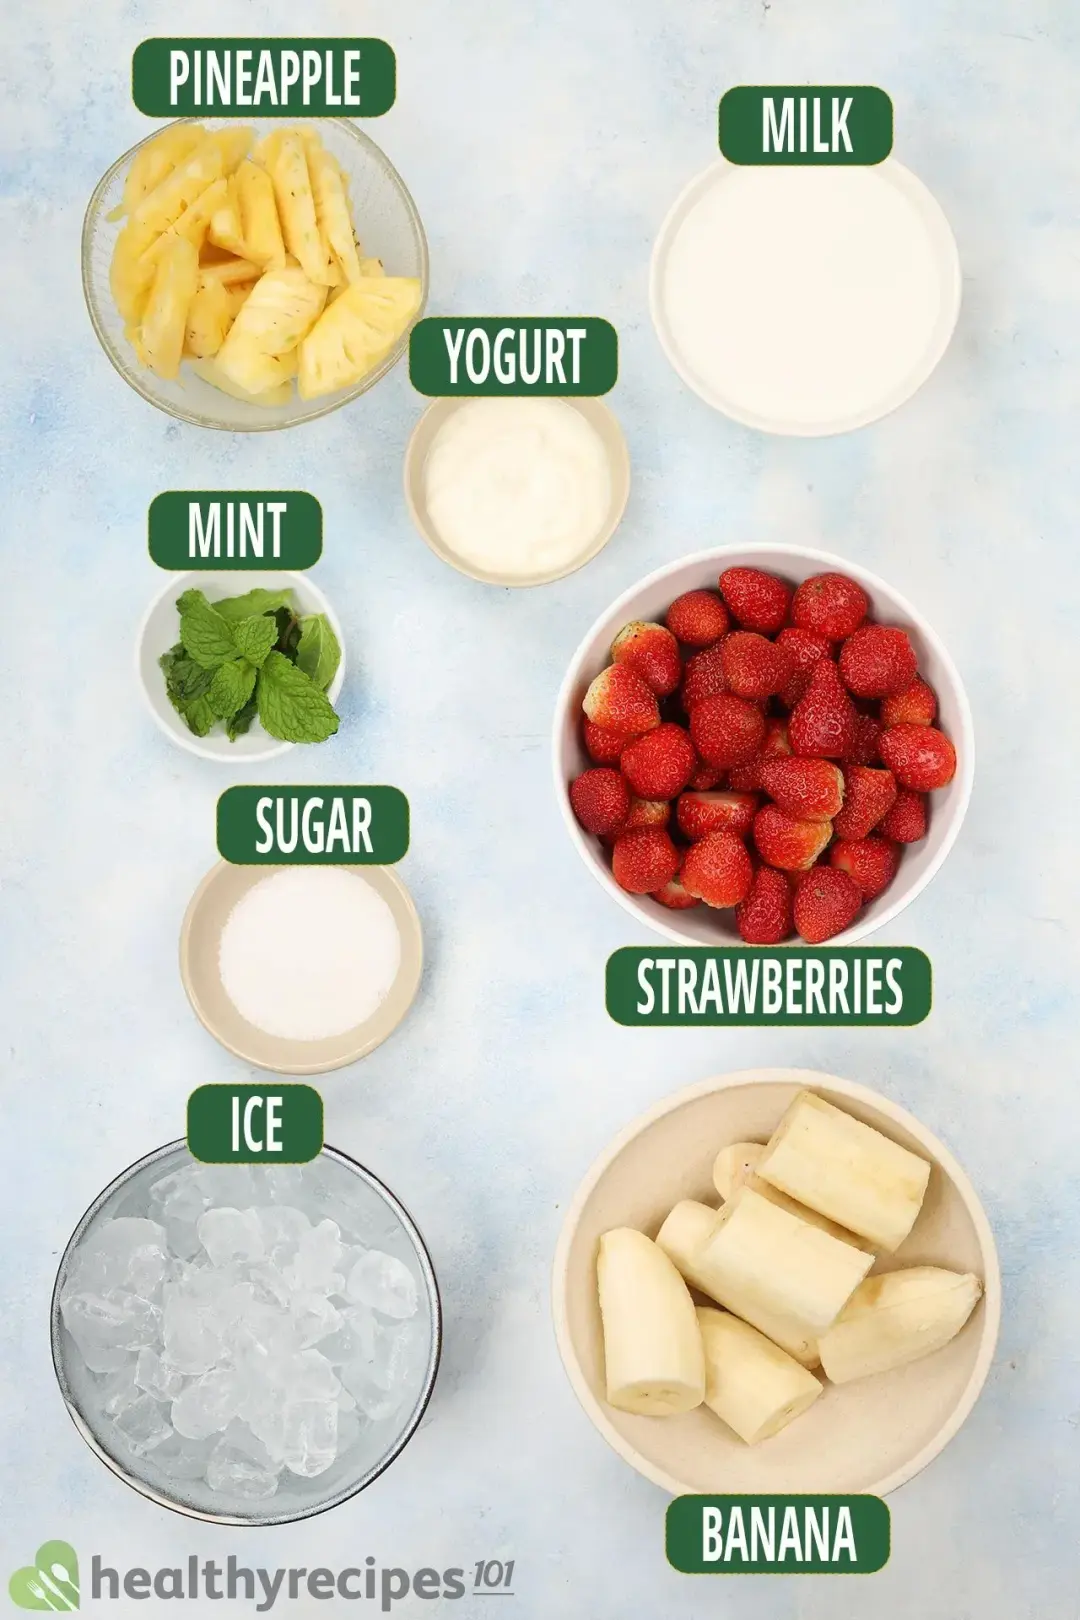 ingredients for Pineapple Strawberry Banana Smoothie